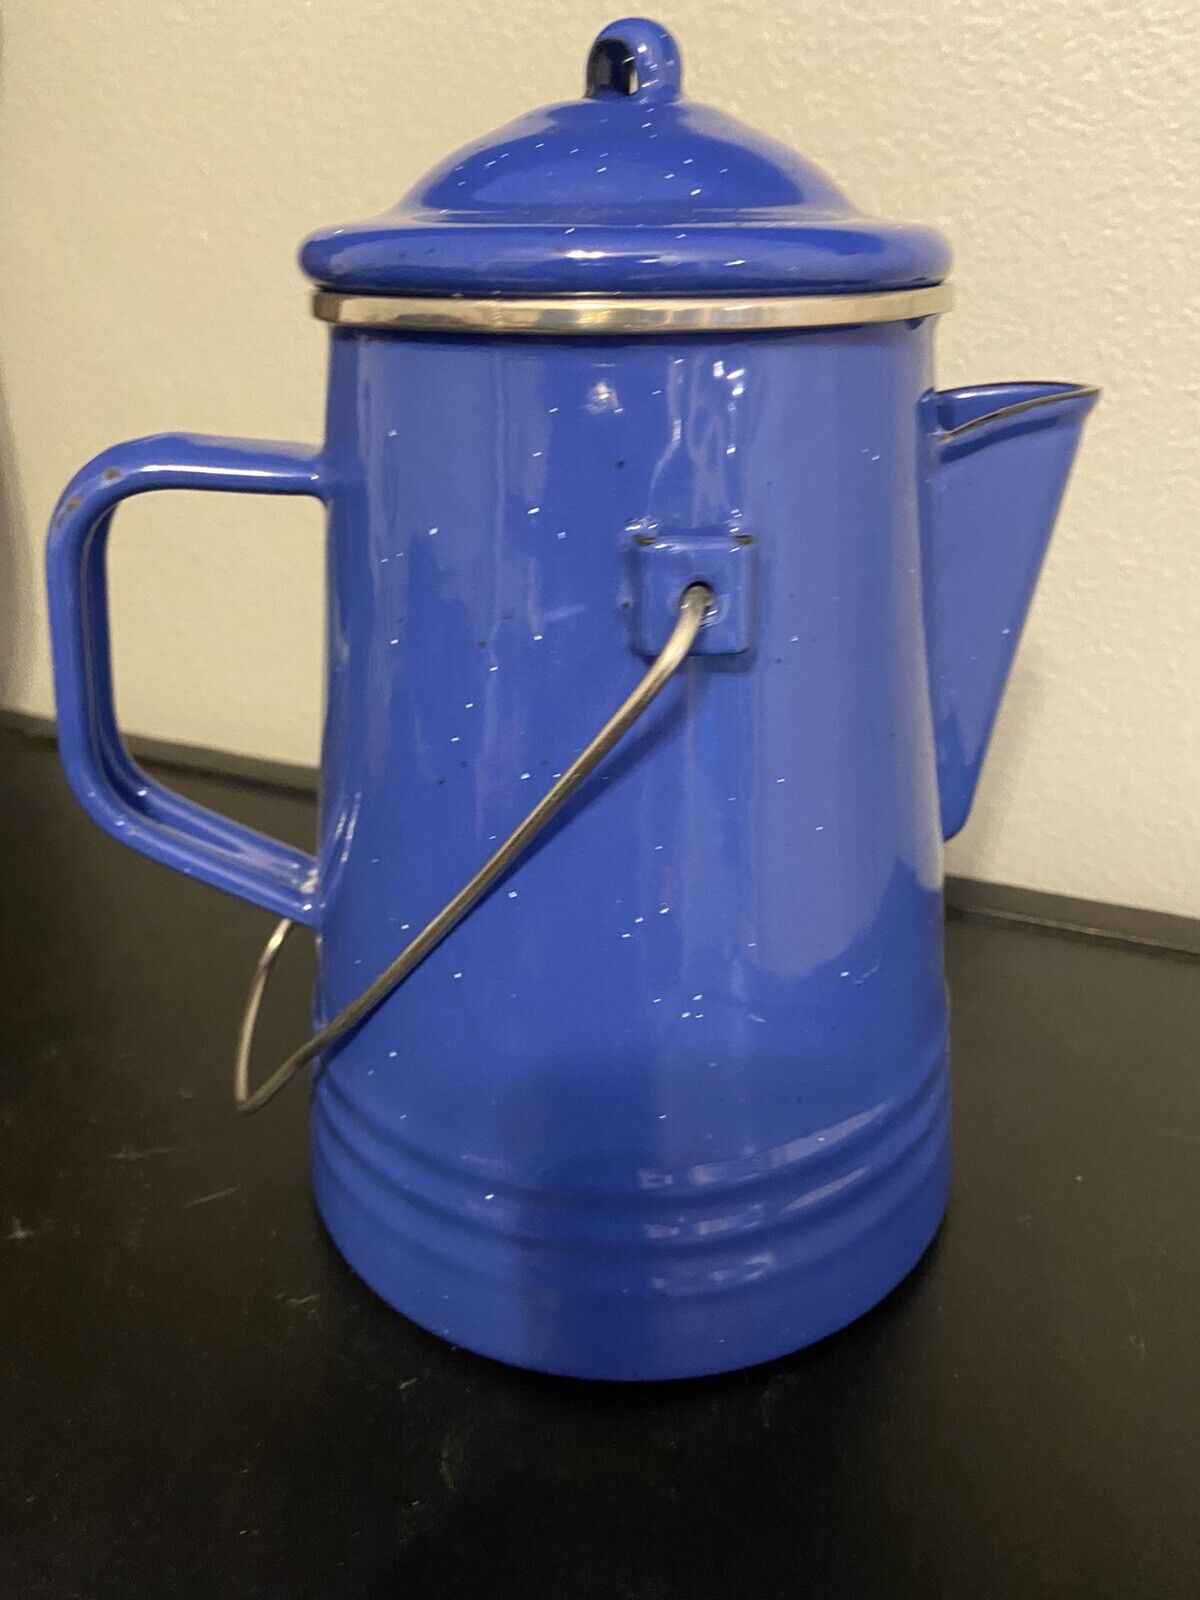 Blue Speckled Enamelware Coffee Pot w/ Carry Handle and Lid Vintage Unbranded